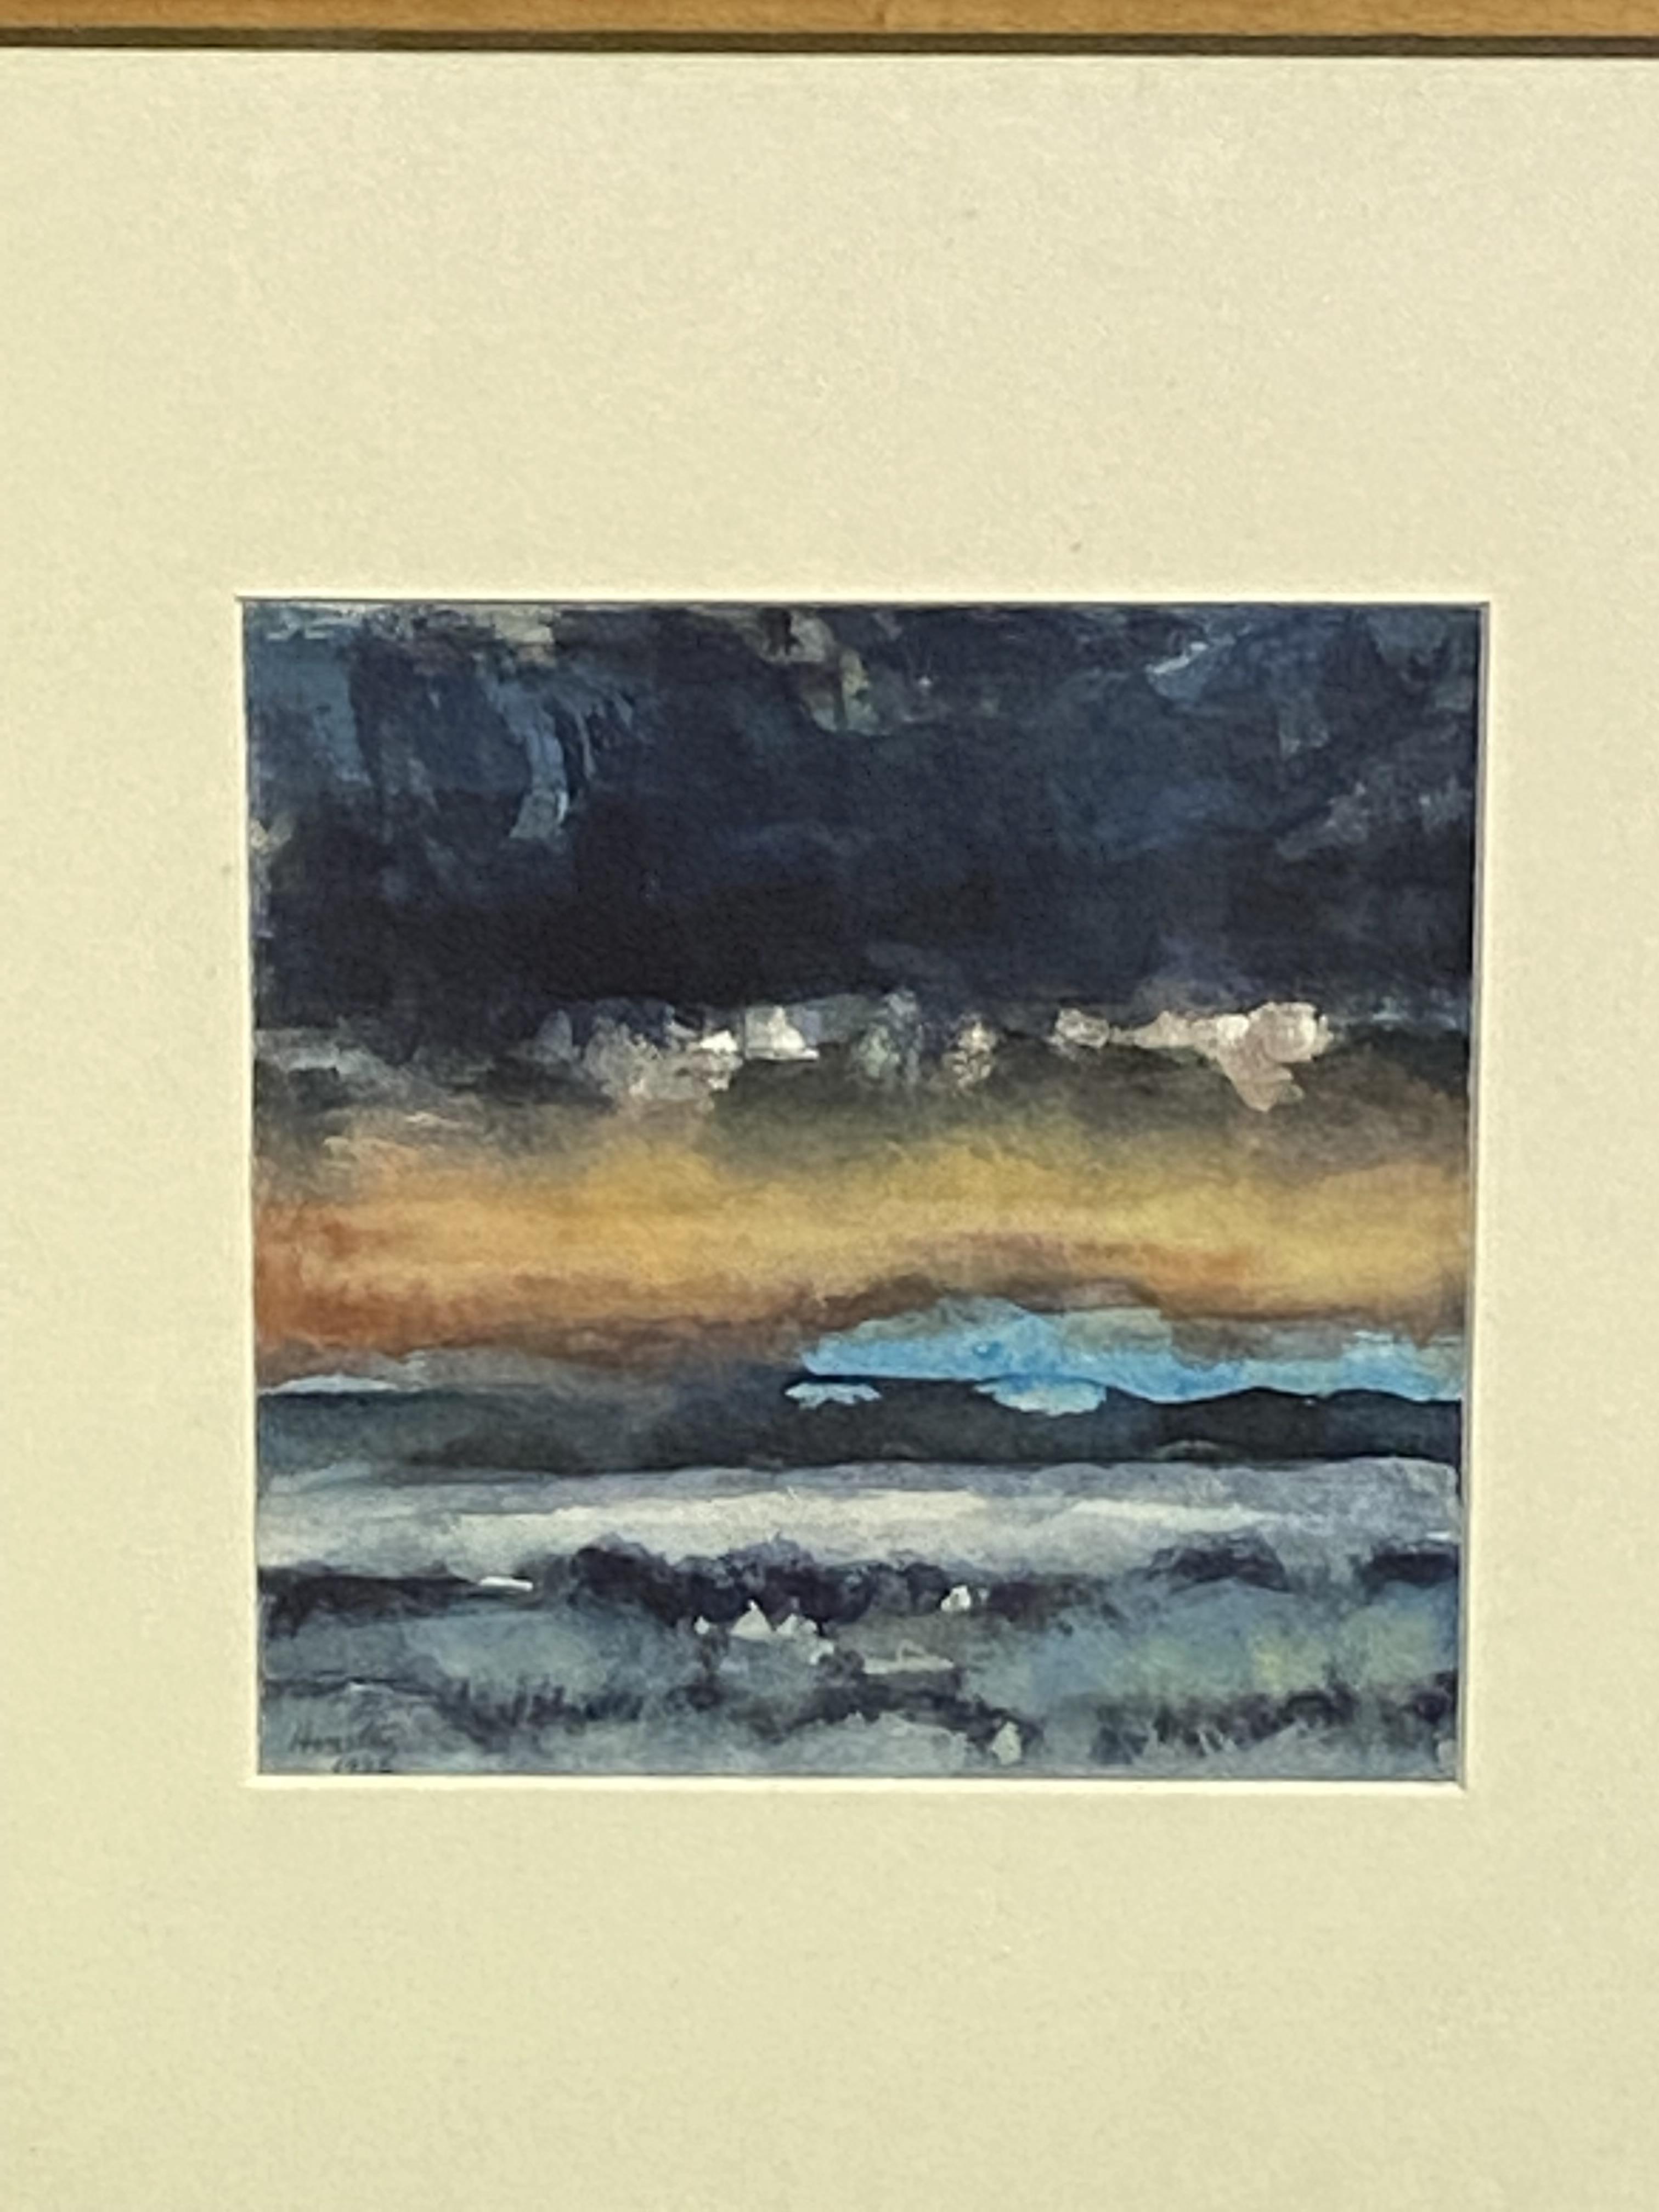 Framed and glazed watercolour - Image 2 of 3